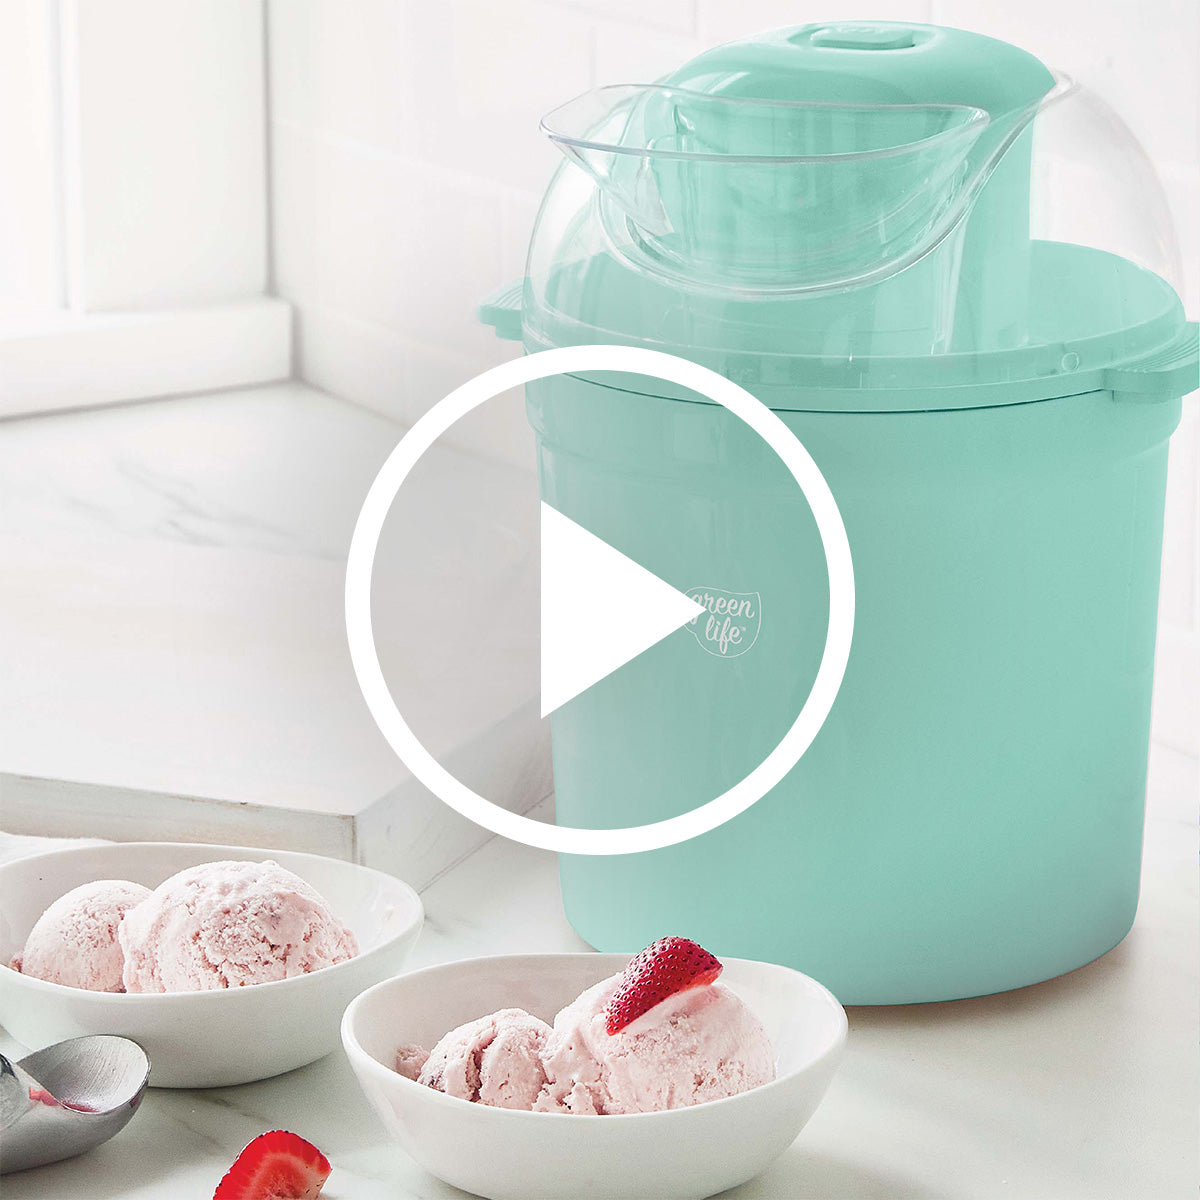 GreenLife Electric Ice Cream Maker - Pink